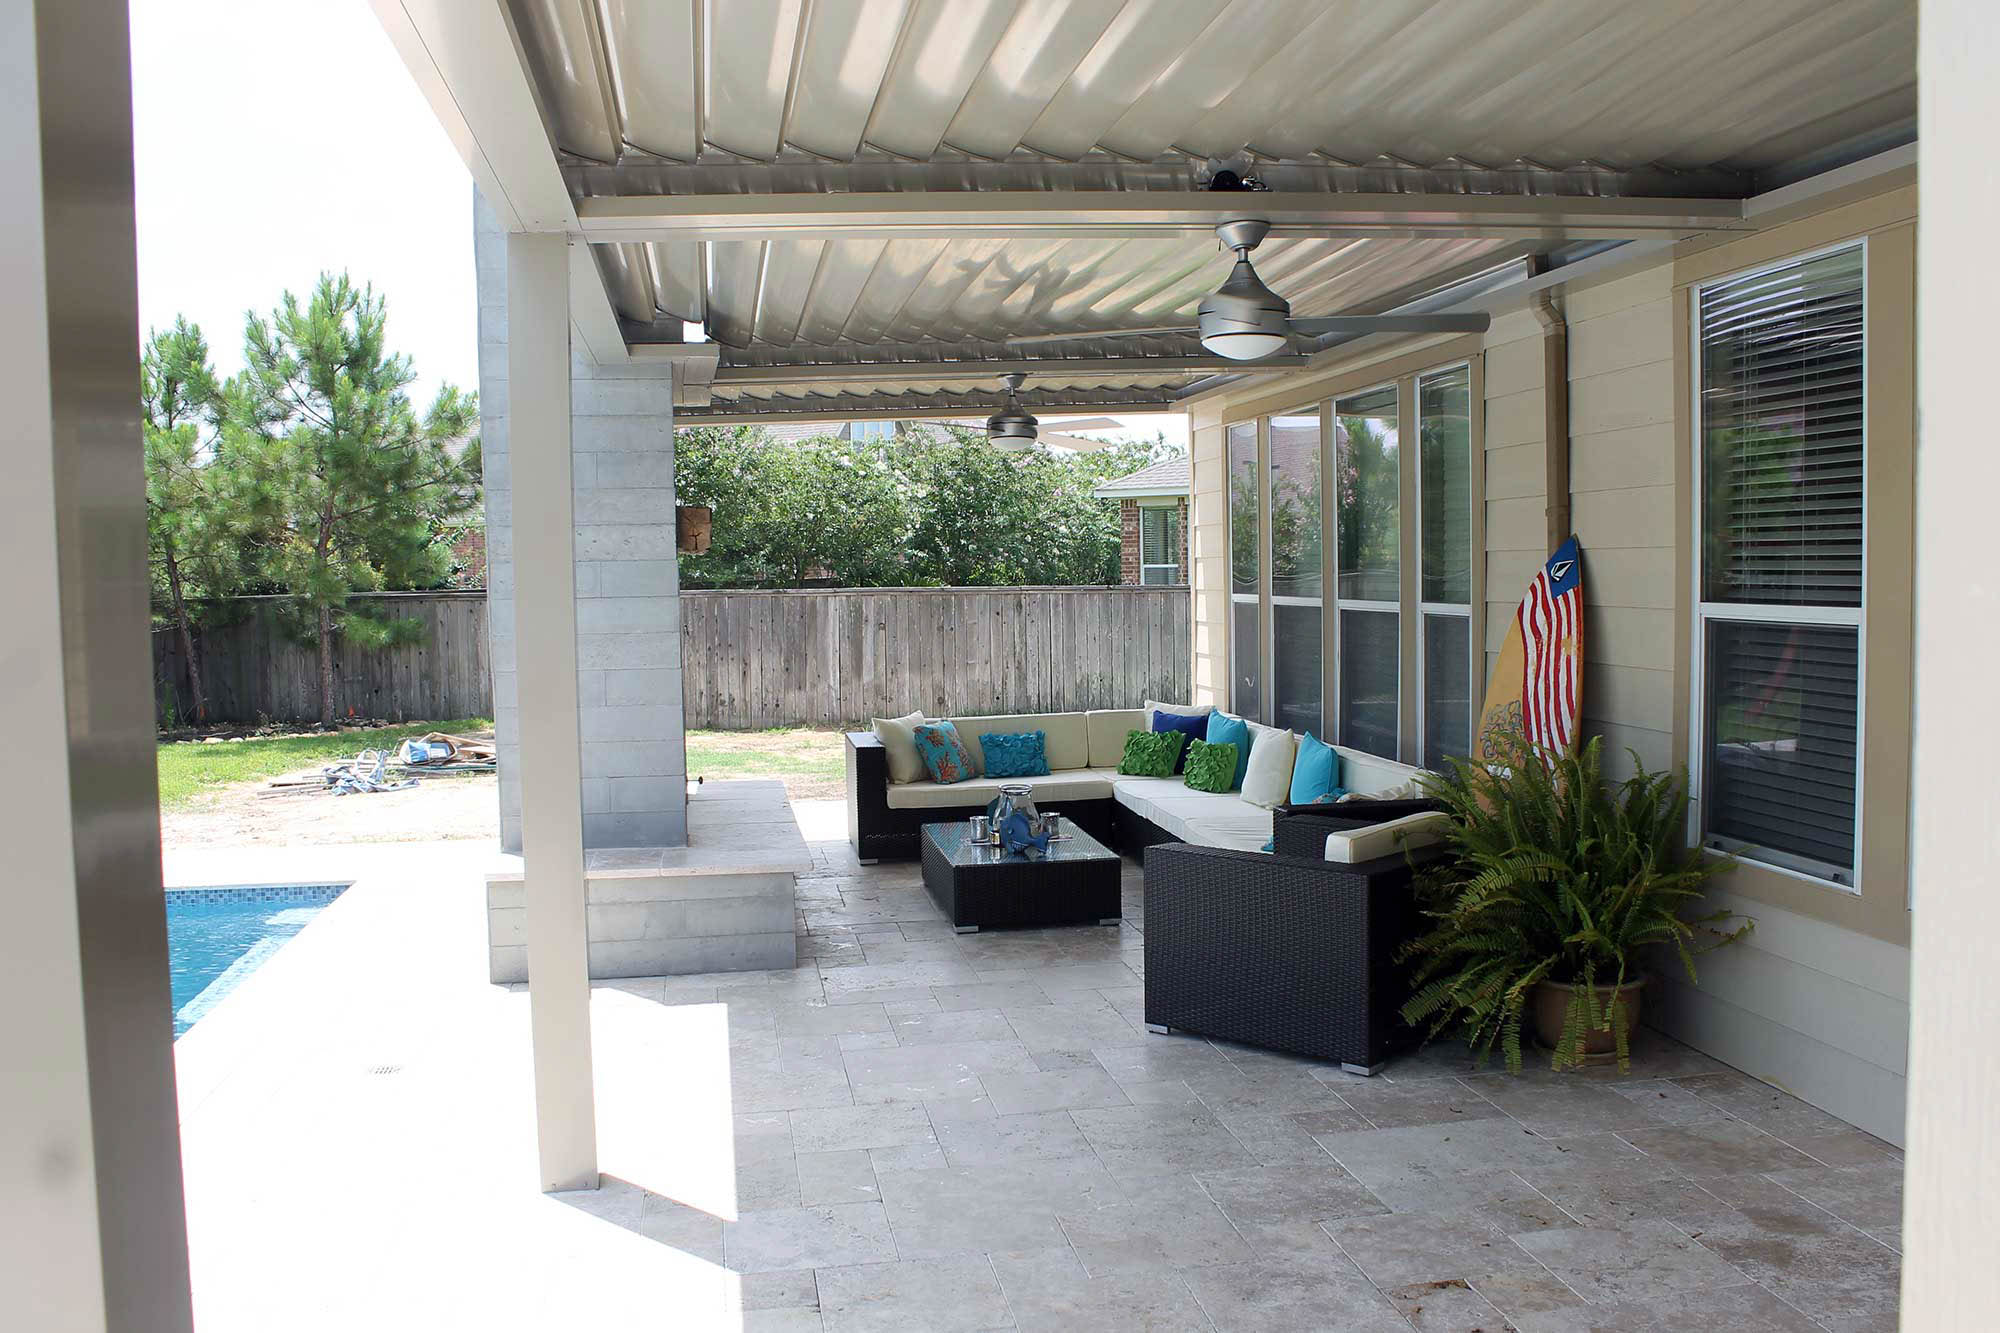 Equinox Louvered Roof